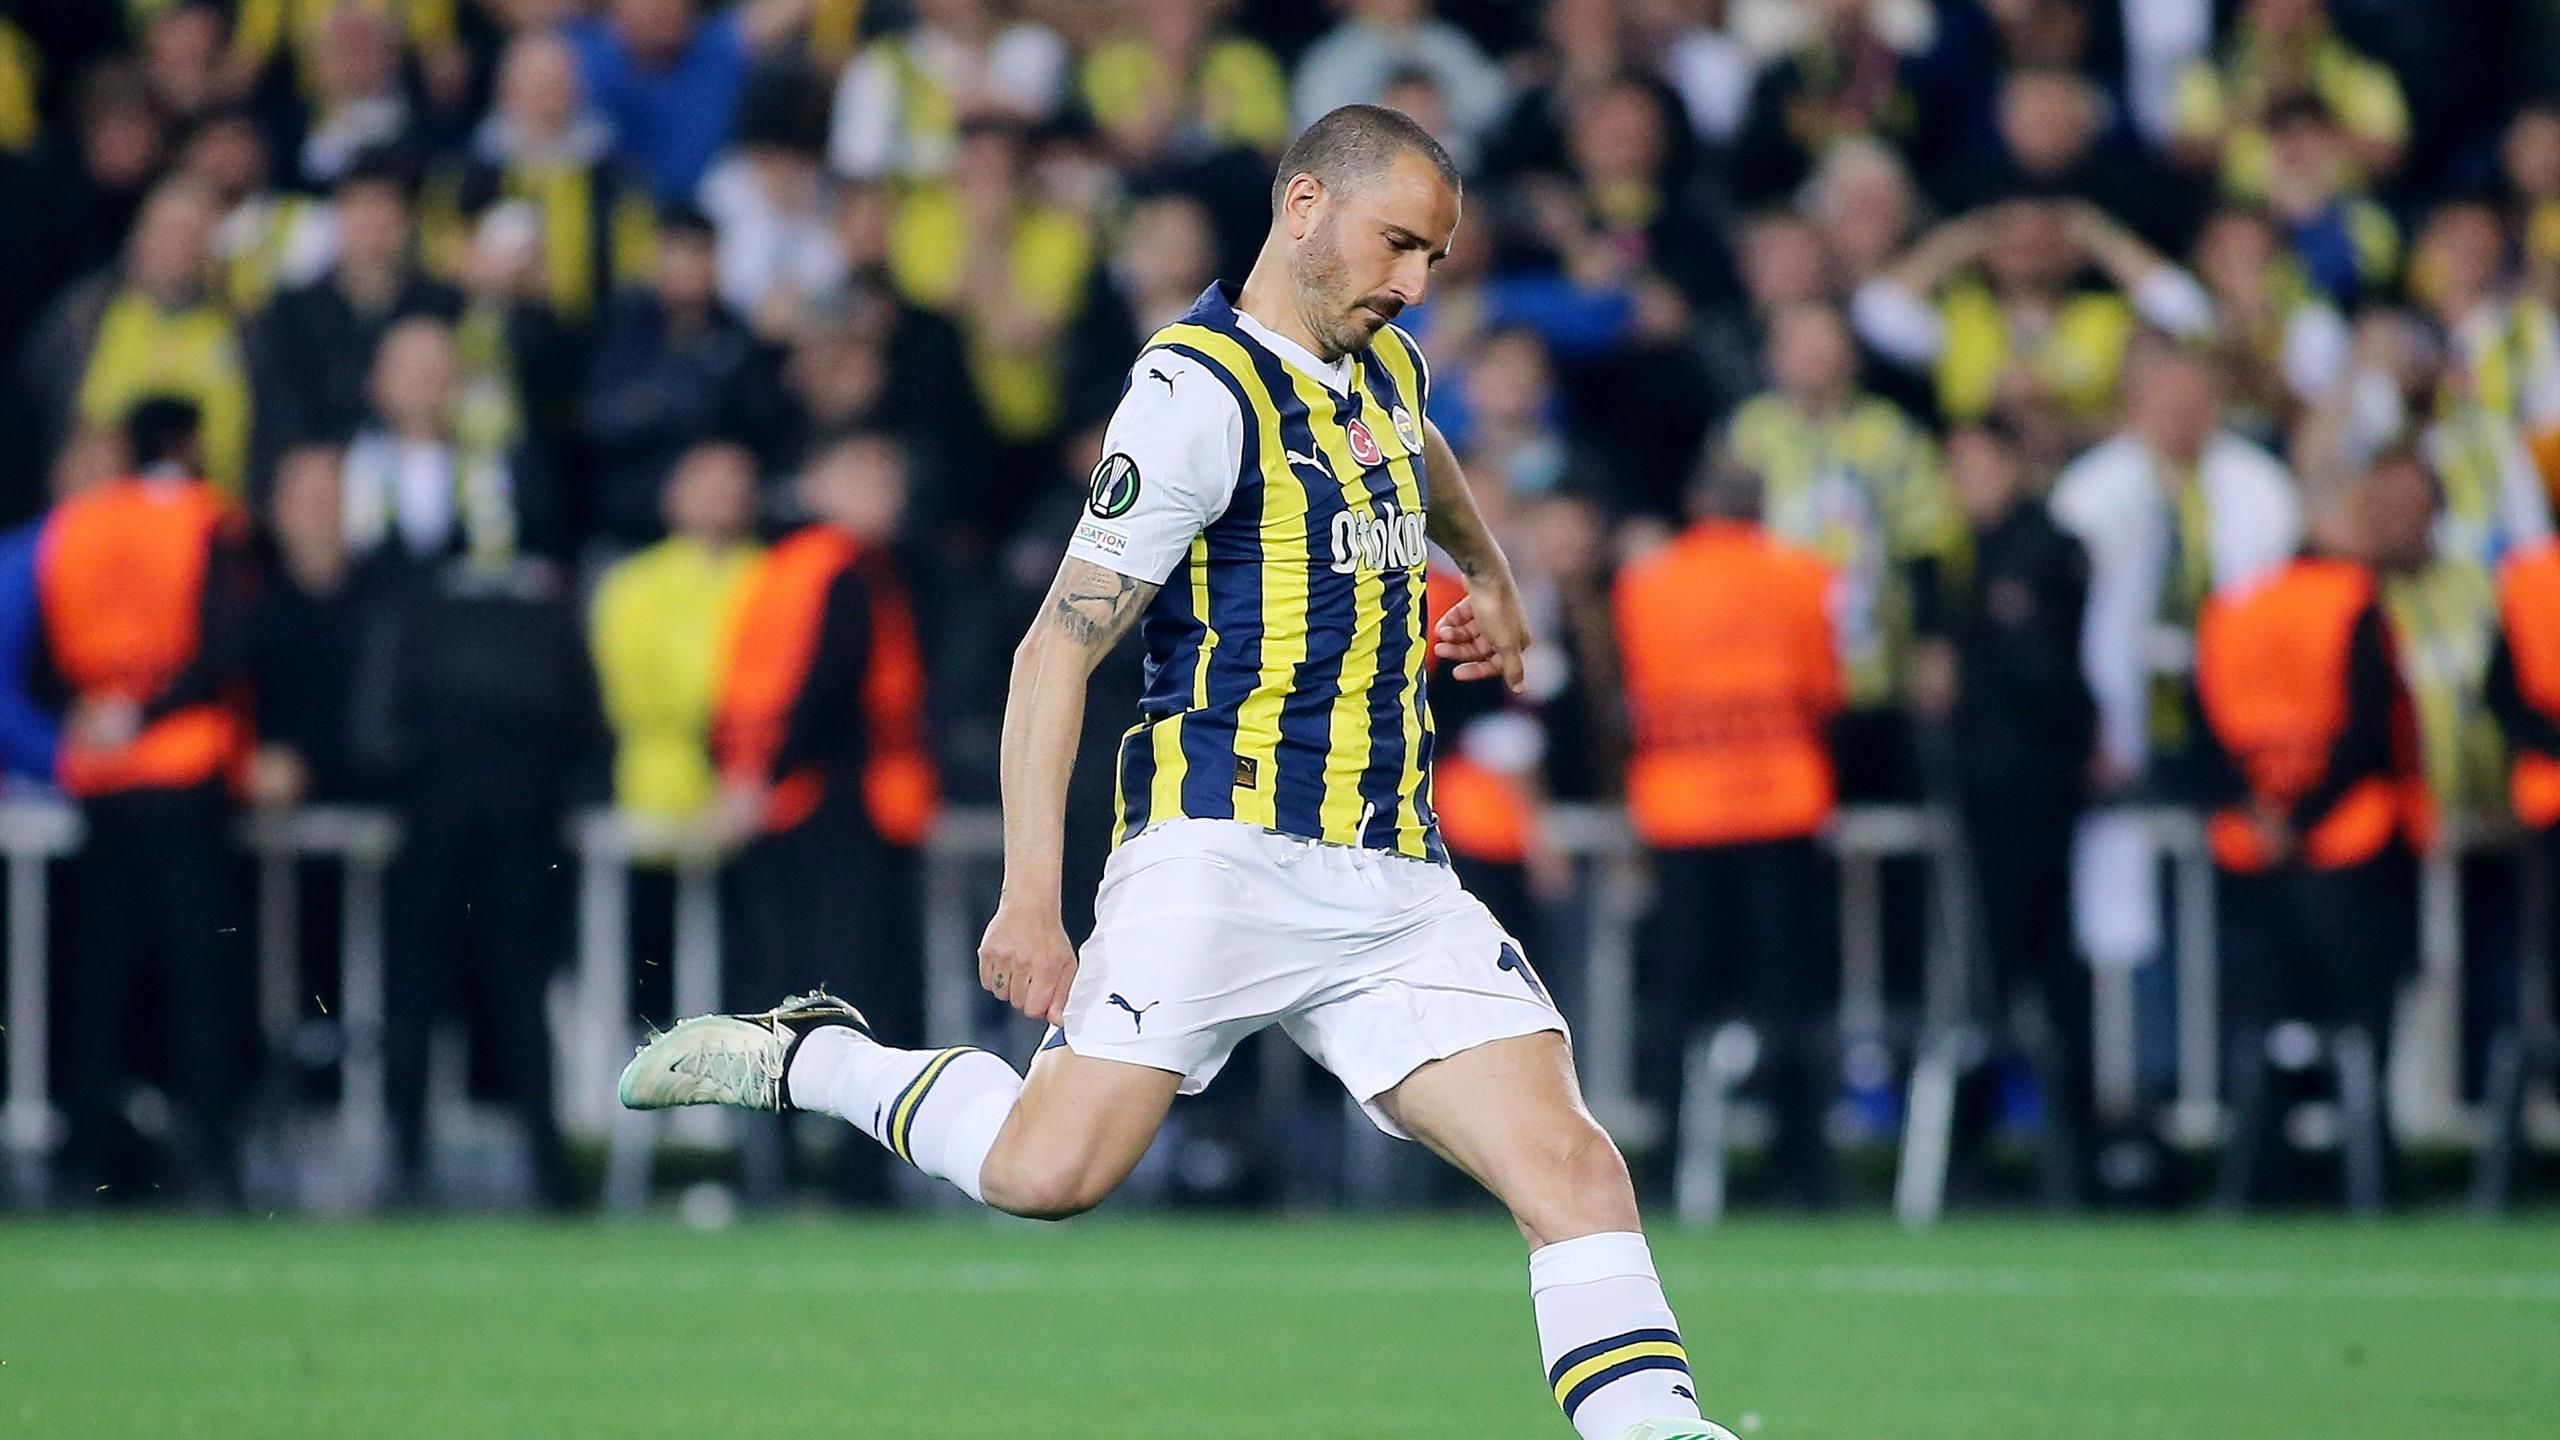 Nightmare for Leonardo Bonucci: he comes on in the 118th minute for Fenerbahce and misses the decisive penalty